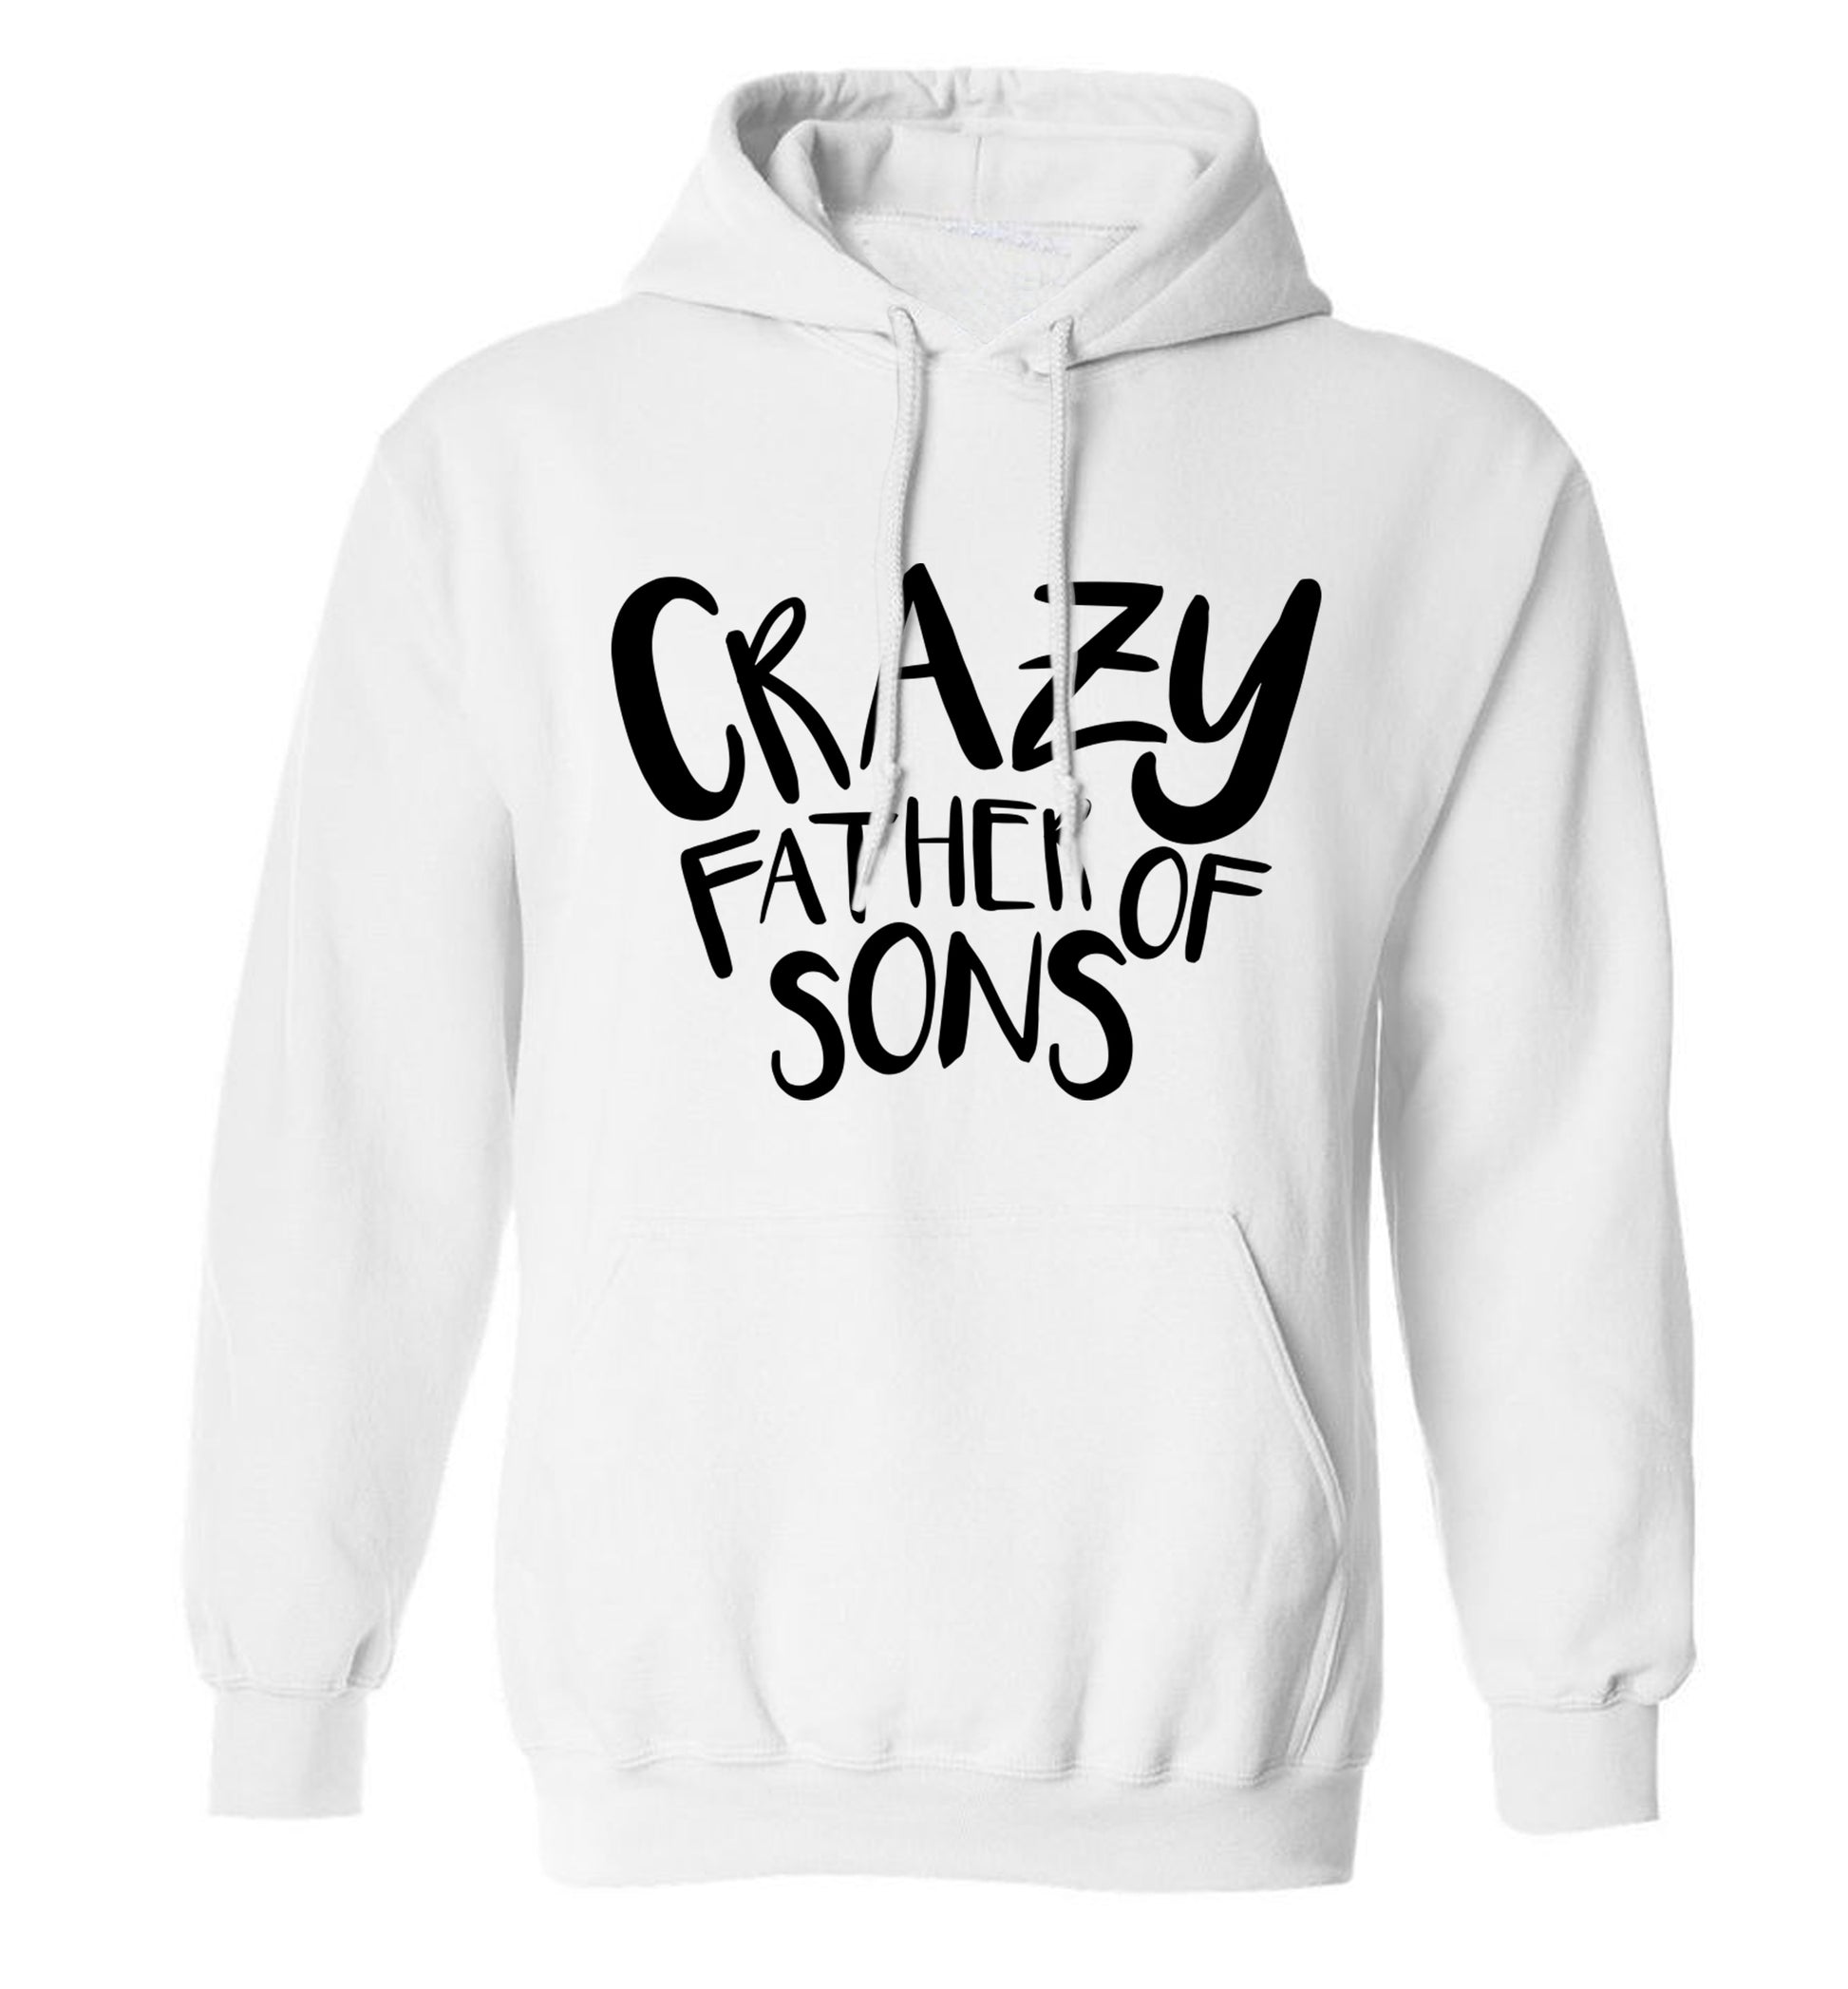 Crazy father of sons adults unisex white hoodie 2XL